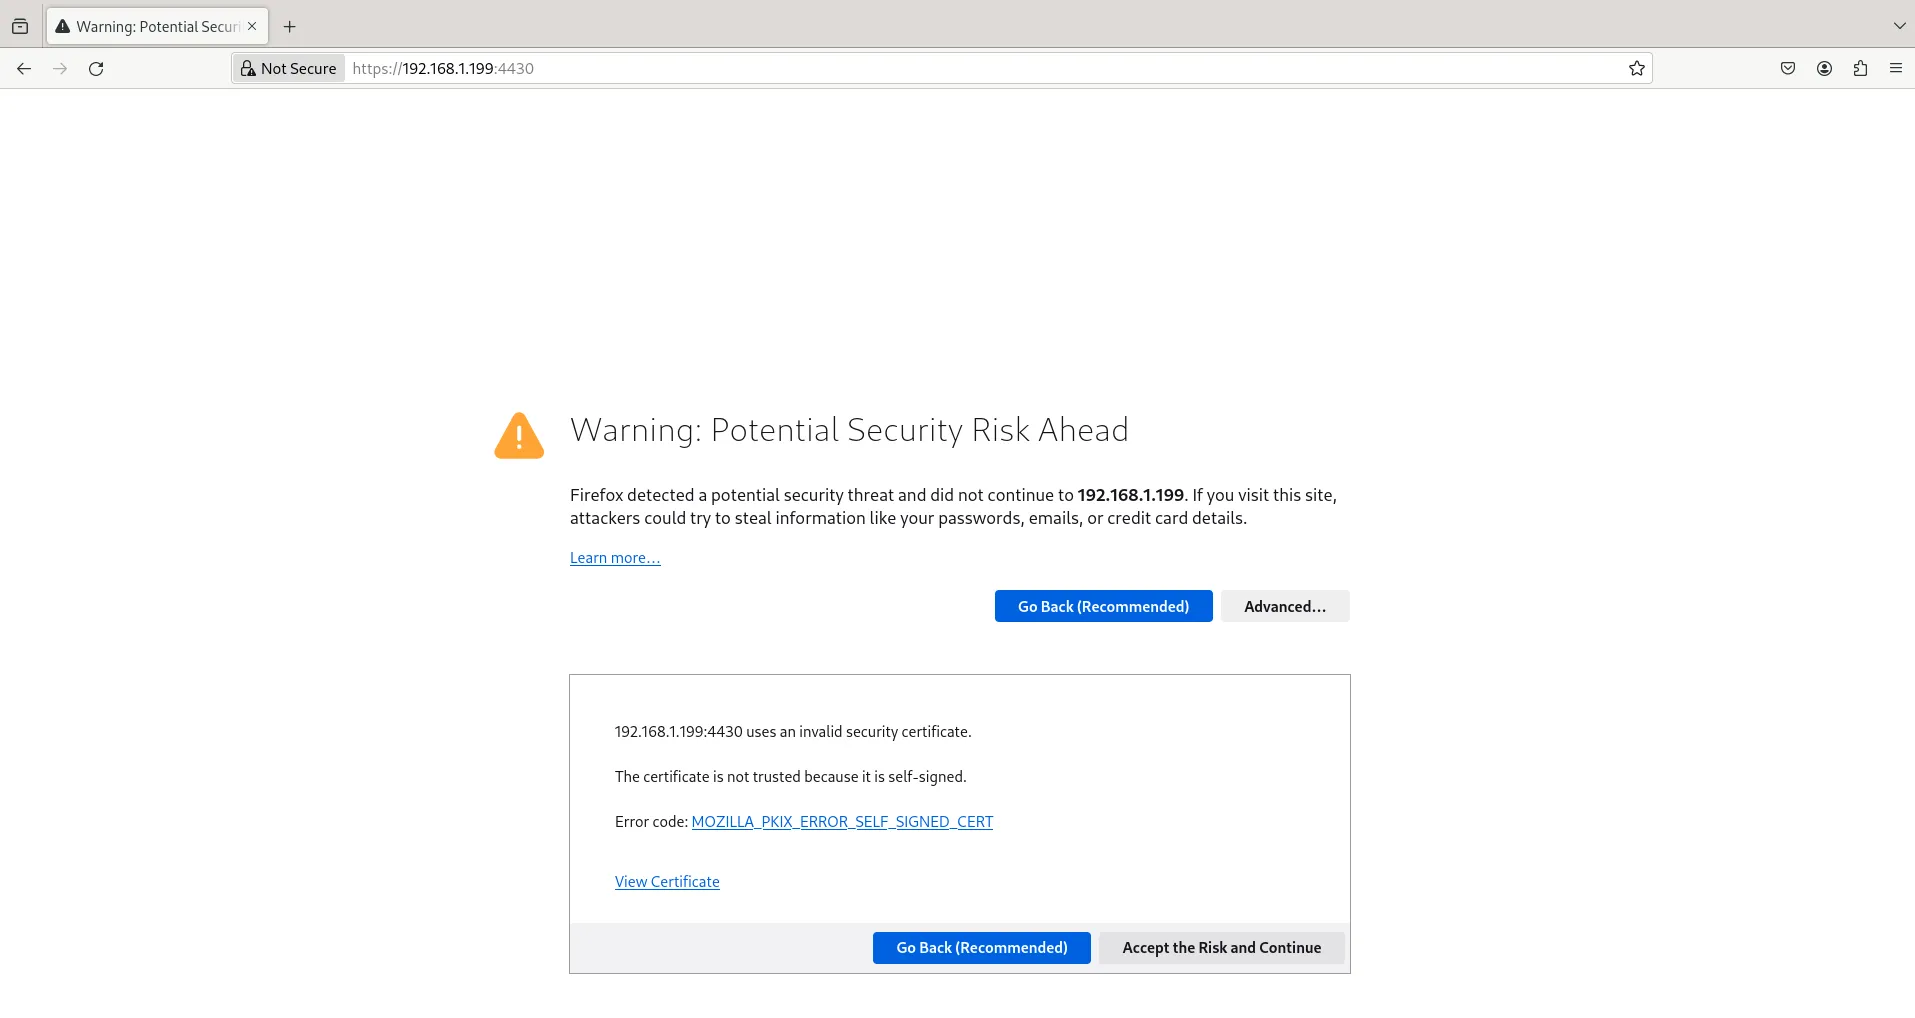 Self-Signed Certificate Warning Page